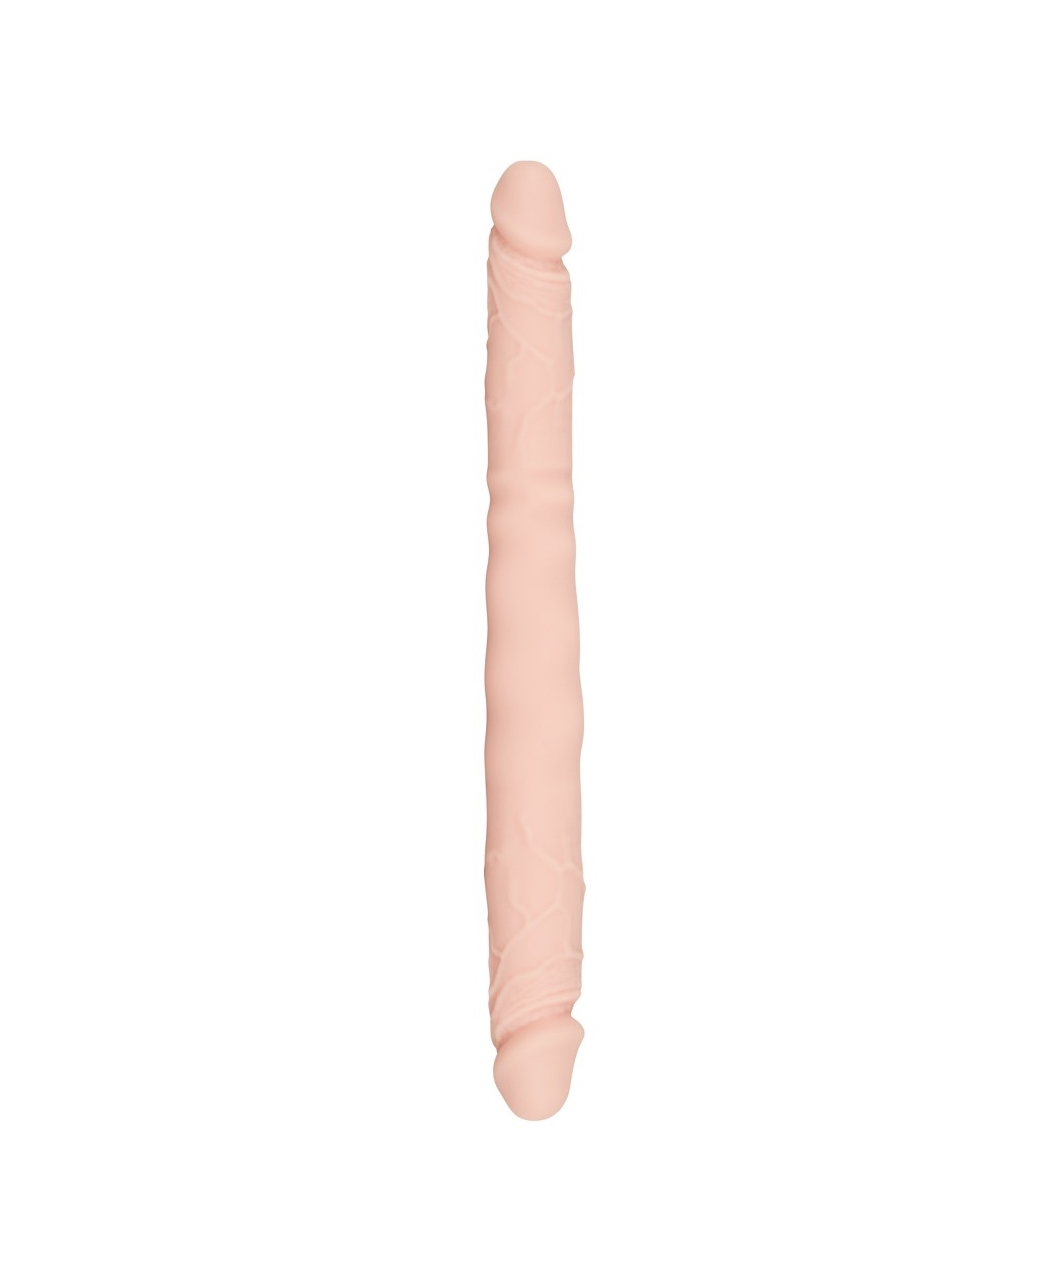 You2Toys Double Dong double ended dildo